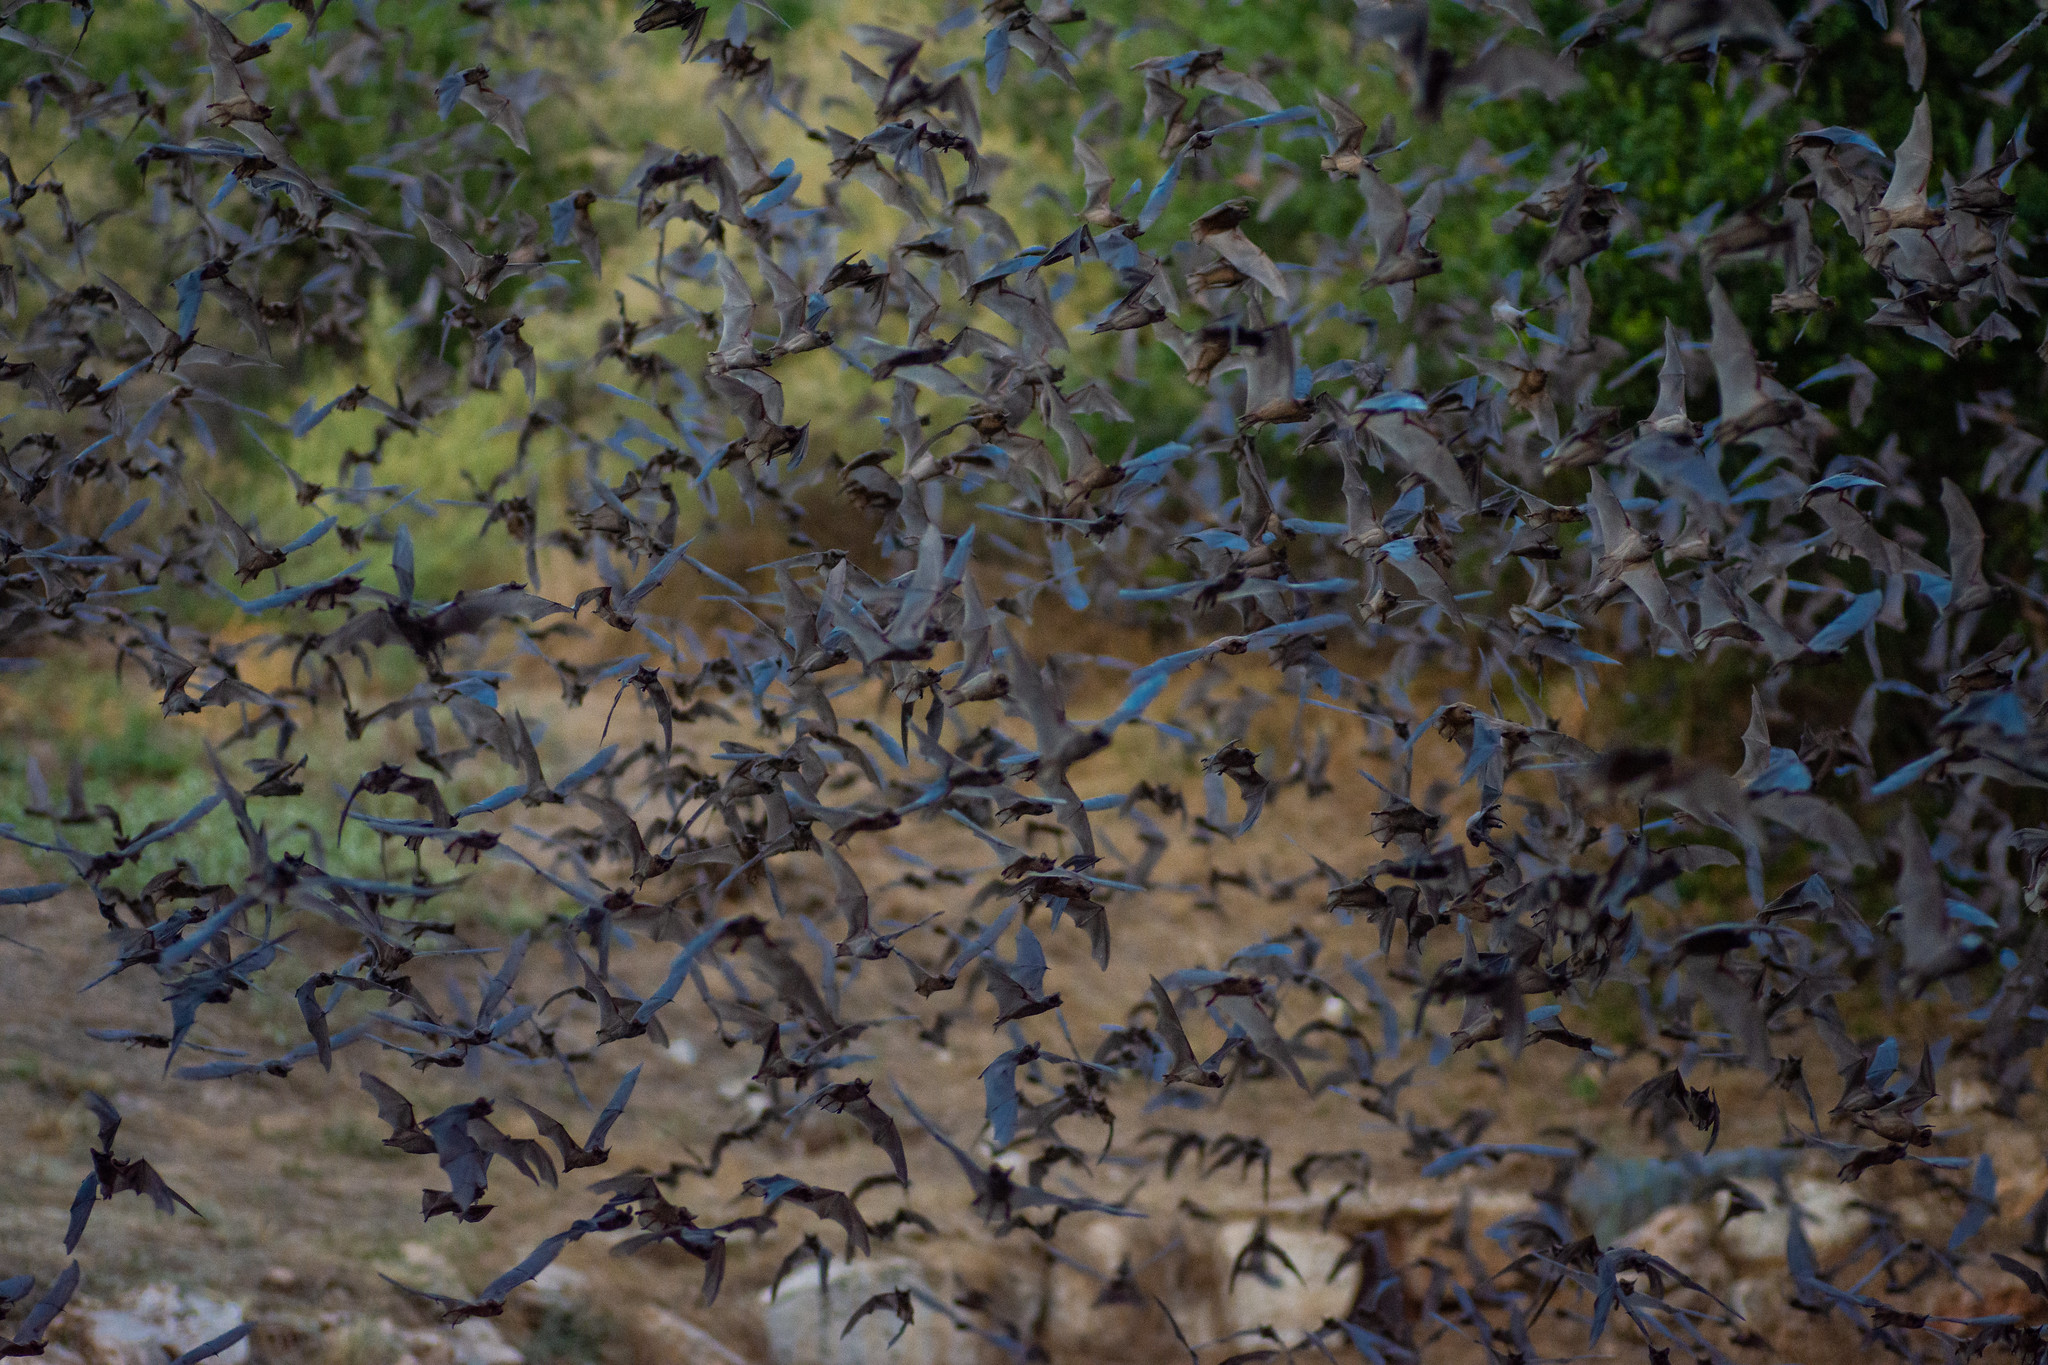 Hundreds of black and dark brown bats fly in a group.